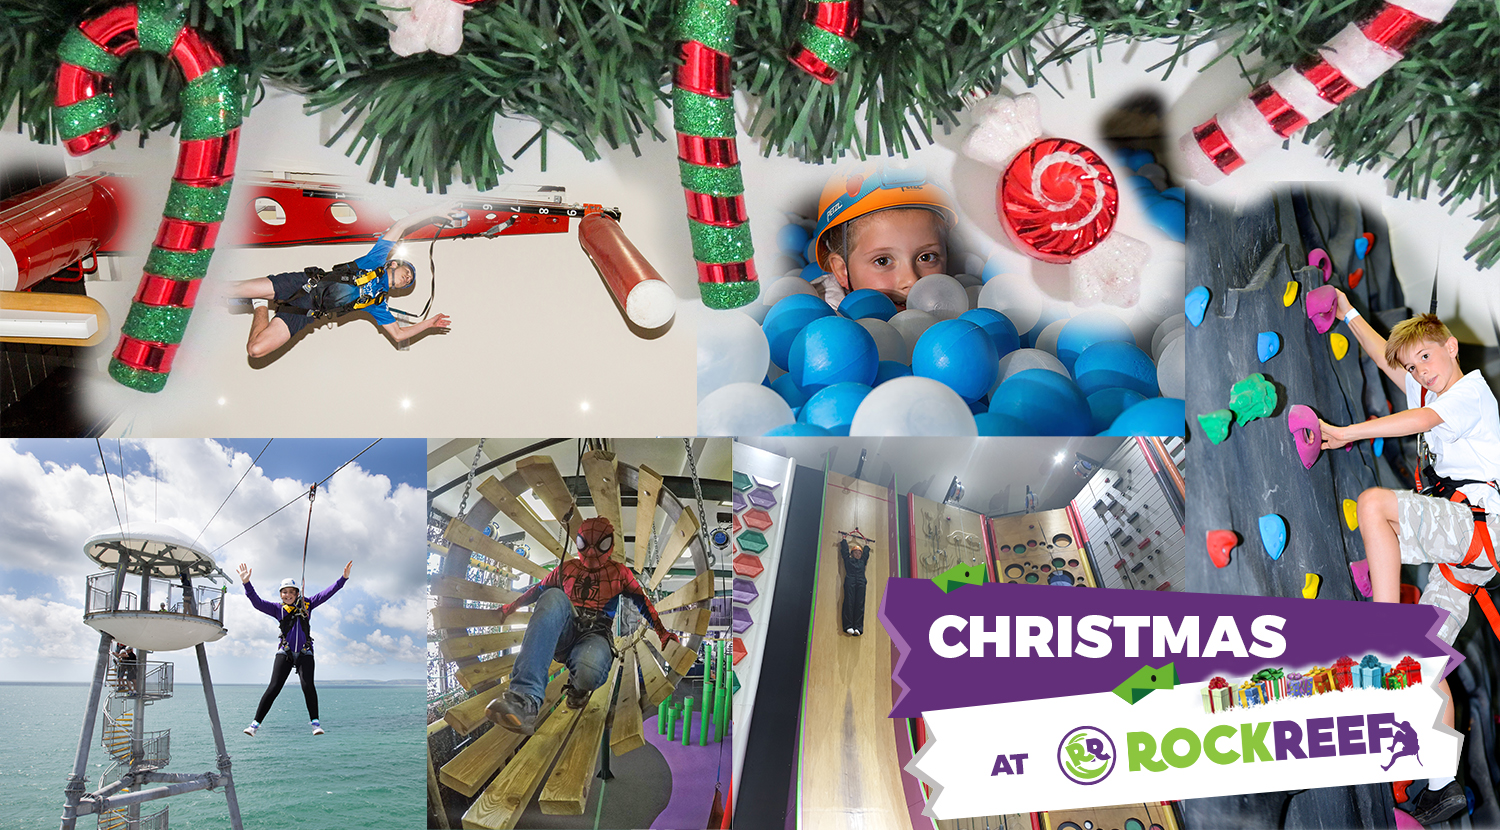 Create great memories with friends & family this Christmas at RockReef & the PierZip on Bournemouth Pier!